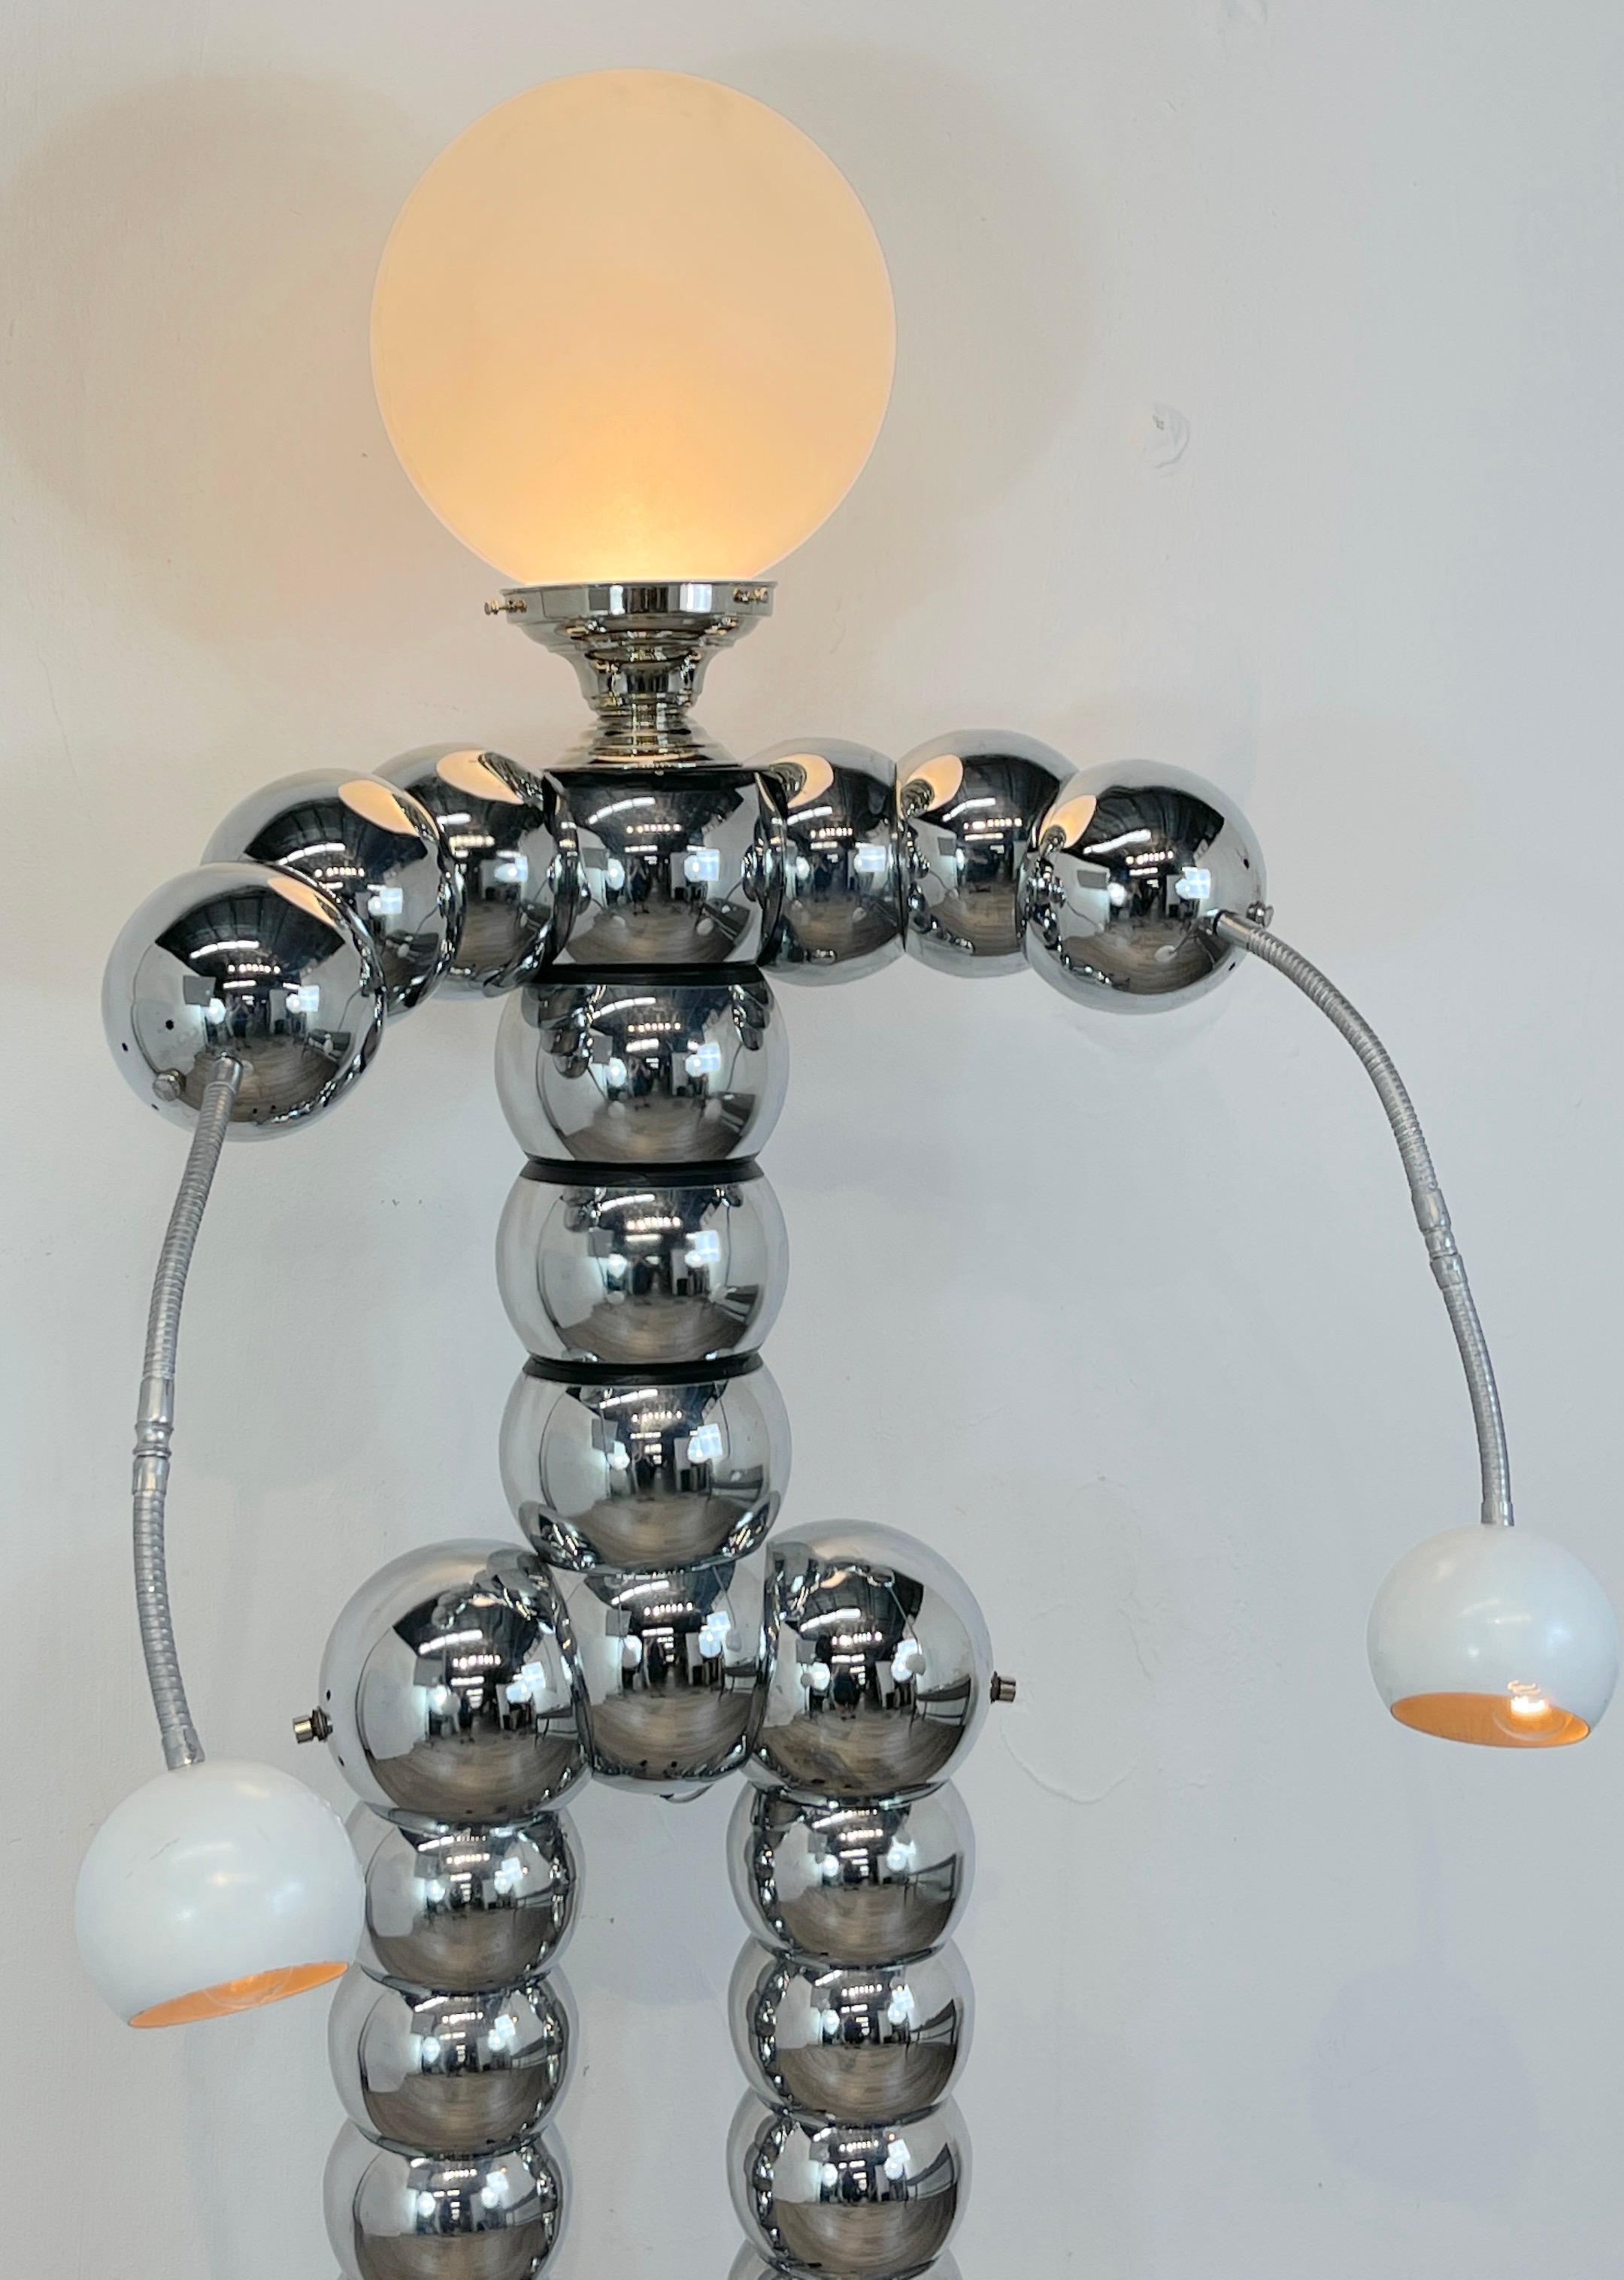 American Chrome Stacked Ball Articulated Robot Floor Lamp Attributed to George Kovacs